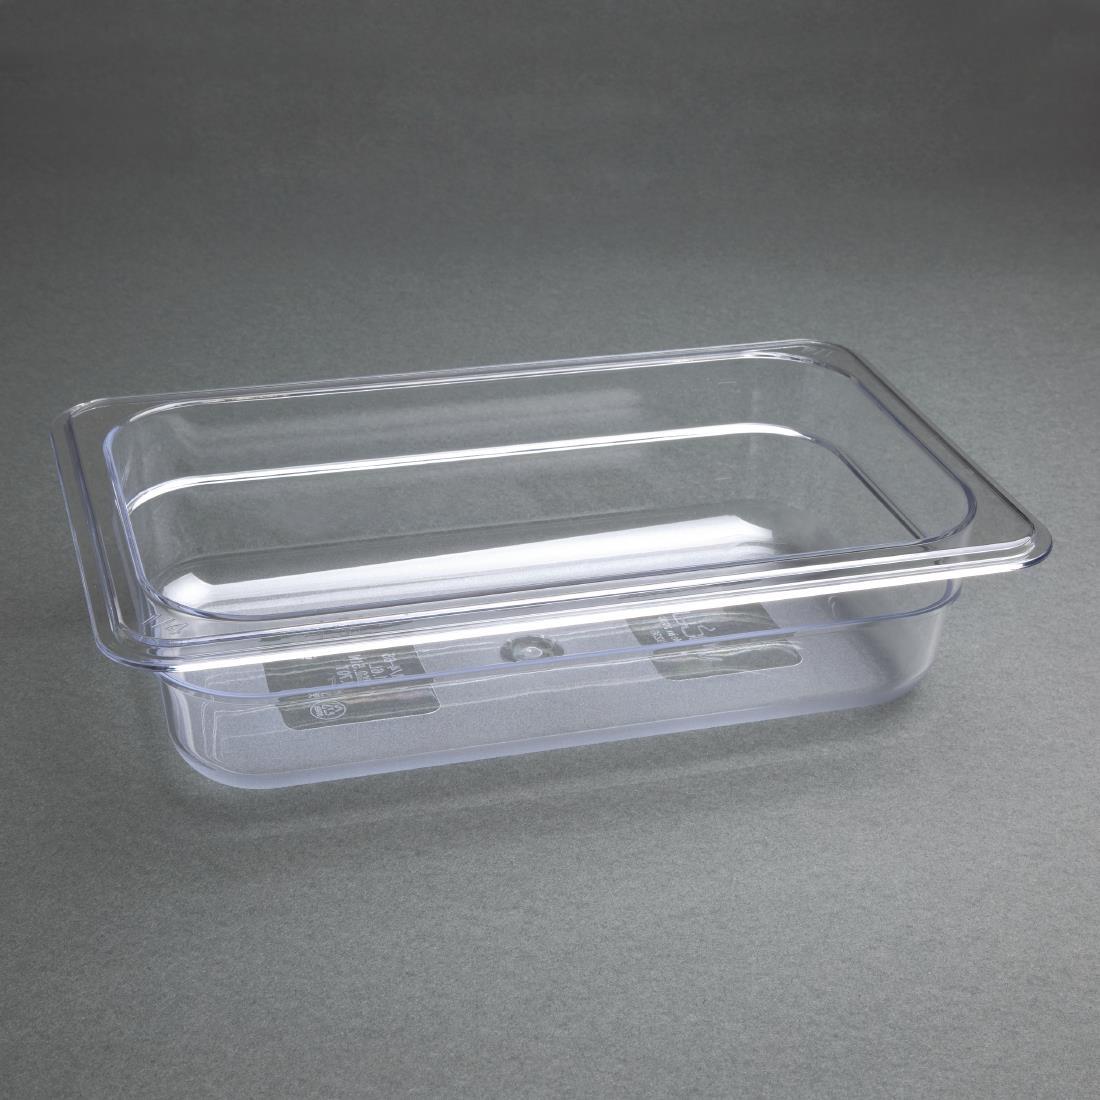 Vogue Polycarbonate 1/4 Gastronorm Container 65mm Clear - U236  - 6